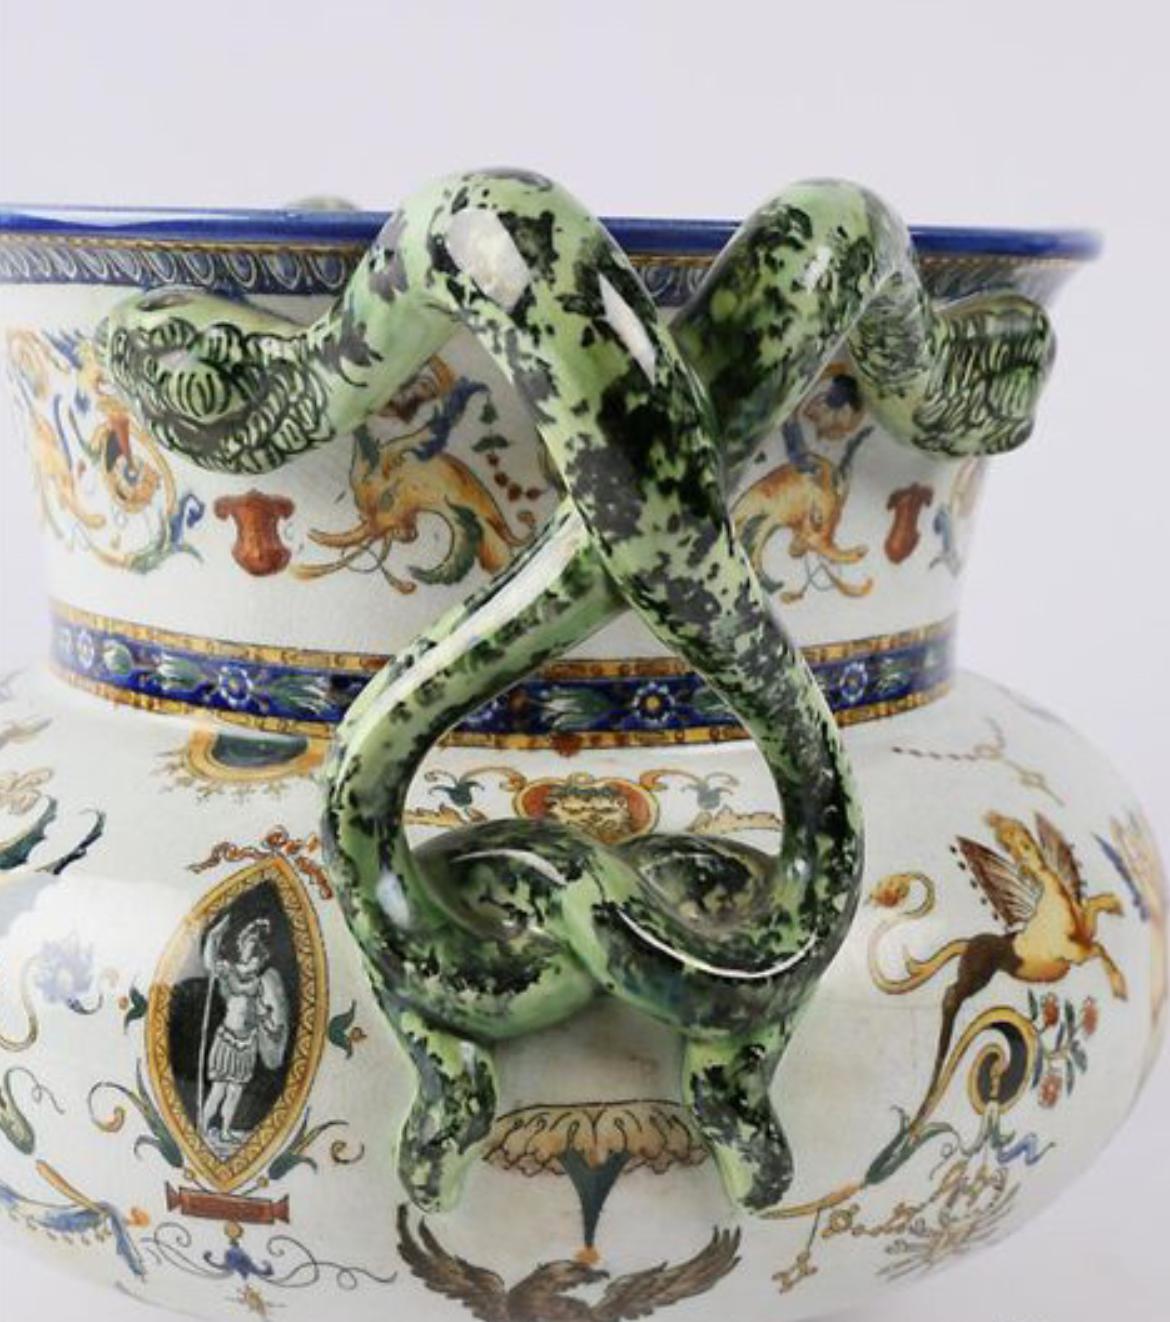 Fine hand painted vase decorated with Jean Bérain cherubs, sphinges and medallions. The handles are made like green snakes. It rests on a tripod base, feet in windings and it is numbered on the reverse.
France, late 19th century.